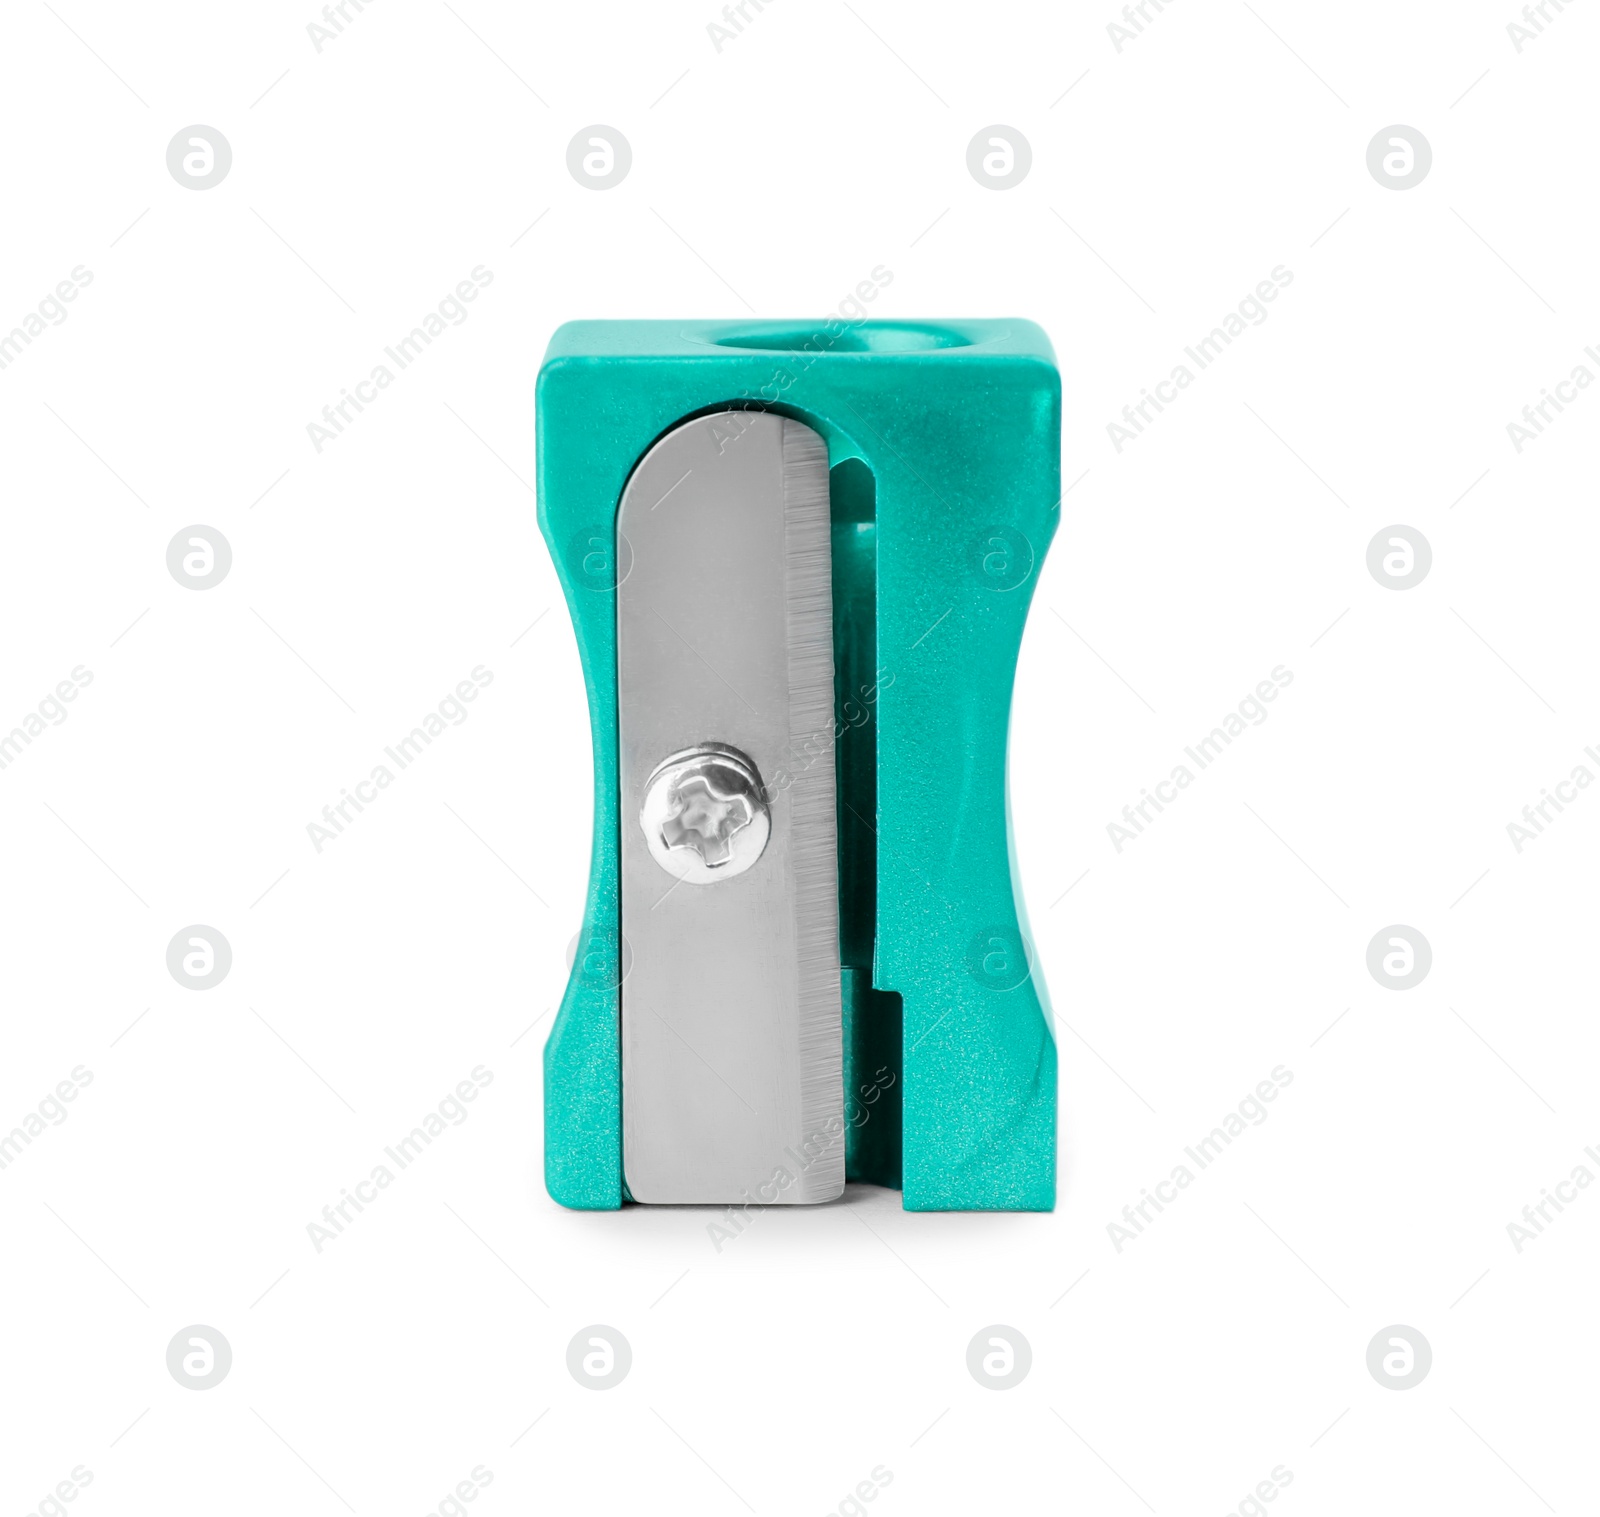 Photo of Plastic turquoise pencil sharpener isolated on white